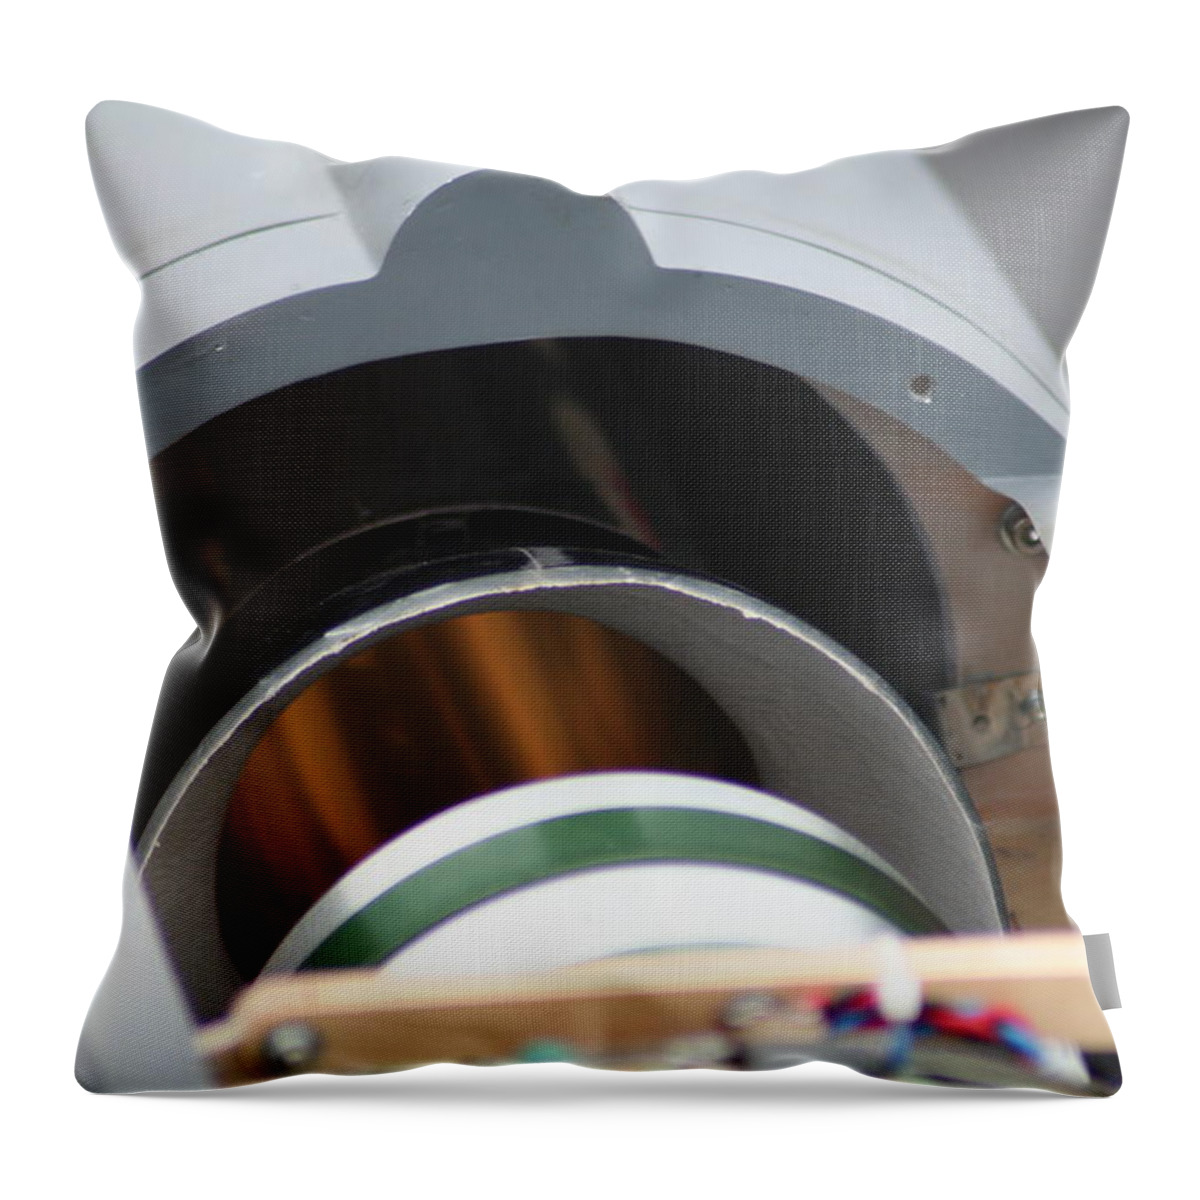 Glow Throw Pillow featuring the photograph Glow by David S Reynolds